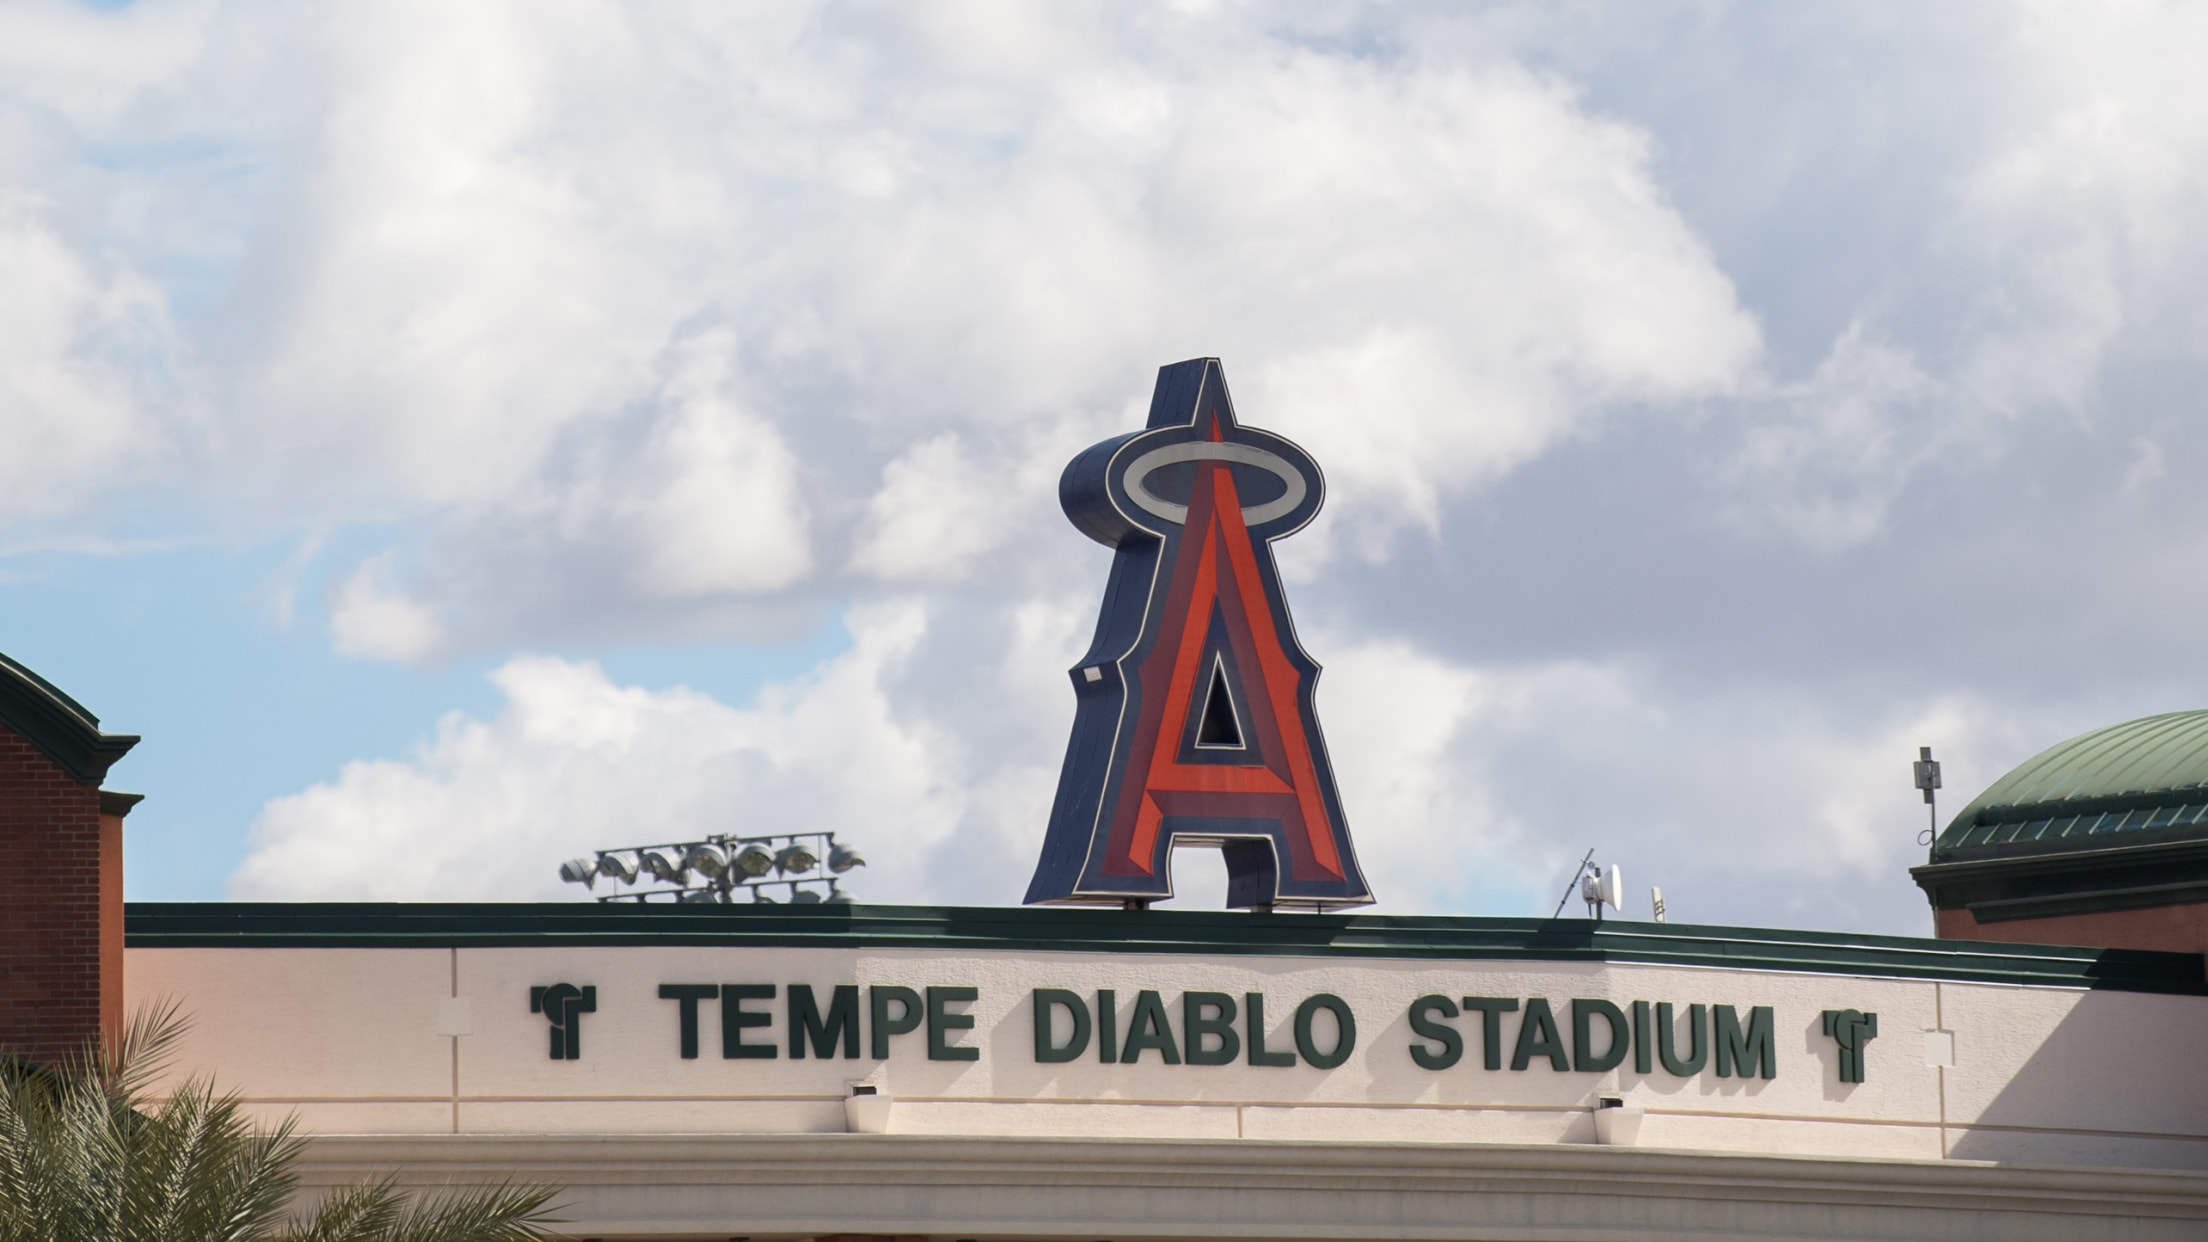 Los Angeles Angels extend spring training stay in Tempe, Arizona